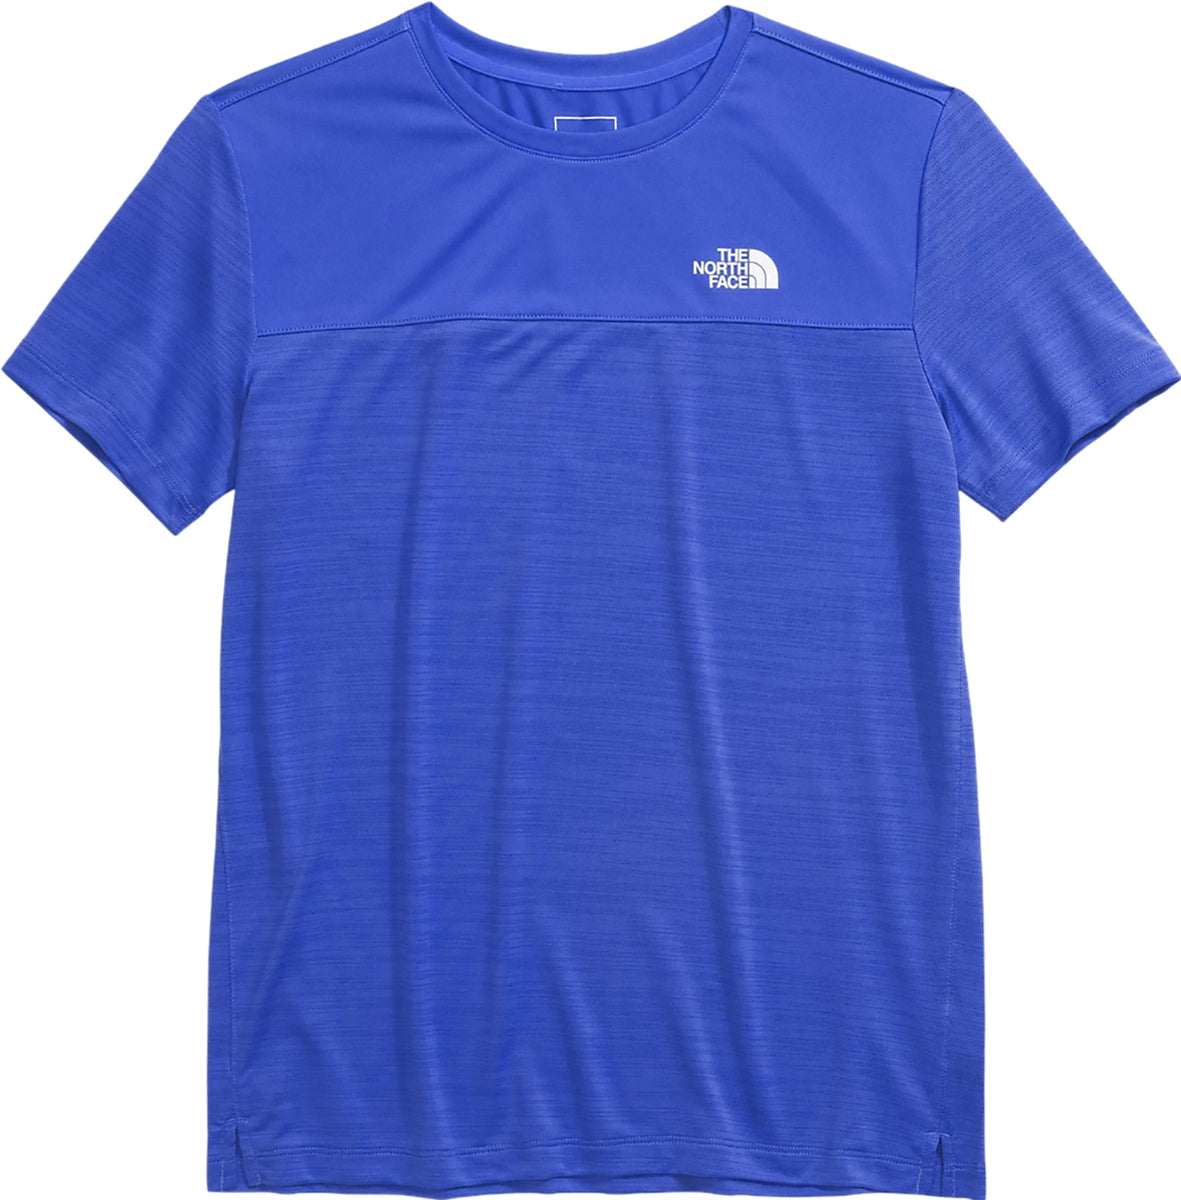 The North Face Short-Sleeve Never Stop Tee - Boys